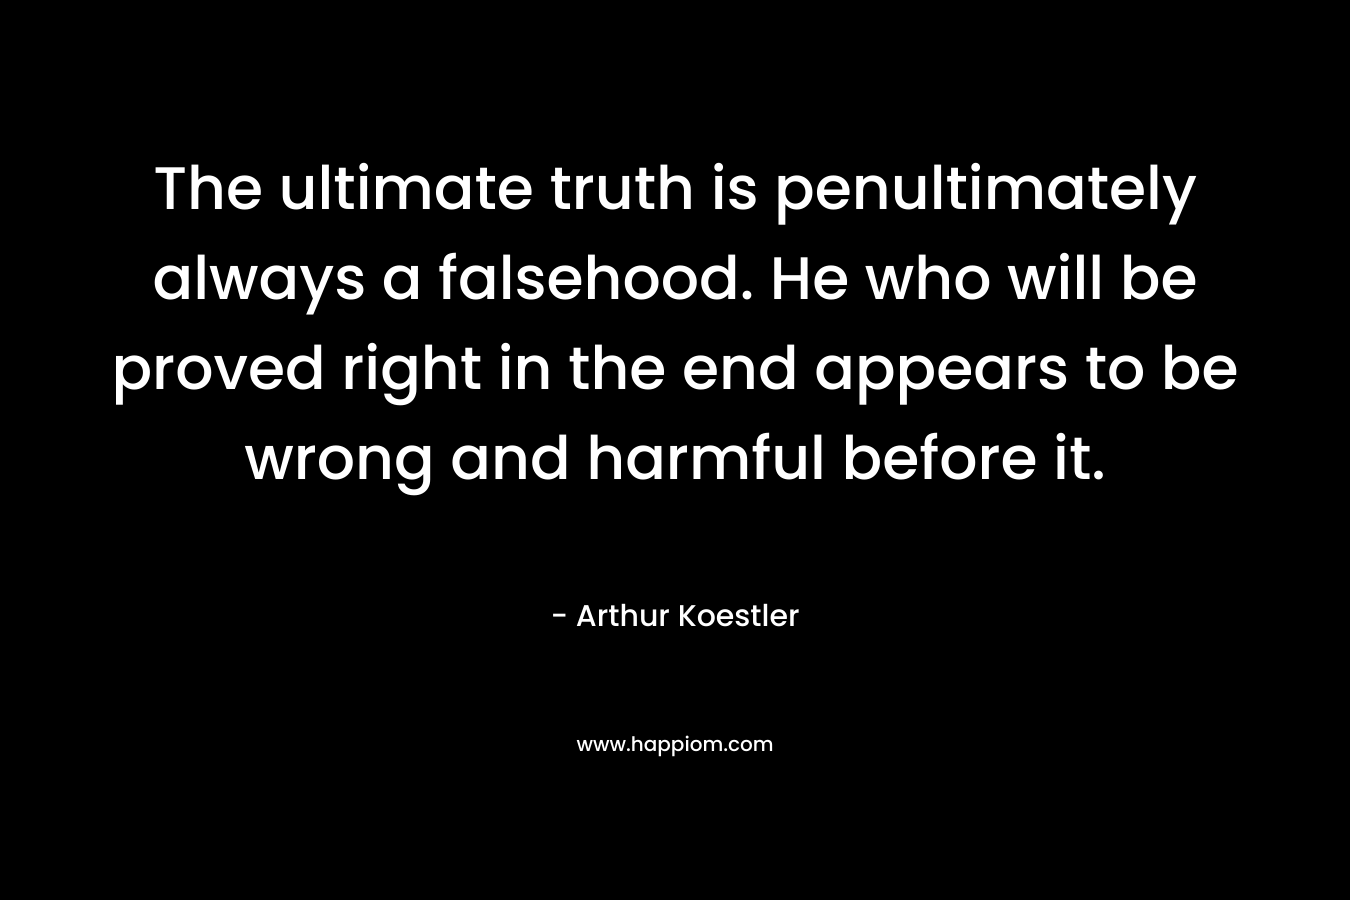 The ultimate truth is penultimately always a falsehood. He who will be proved right in the end appears to be wrong and harmful before it.